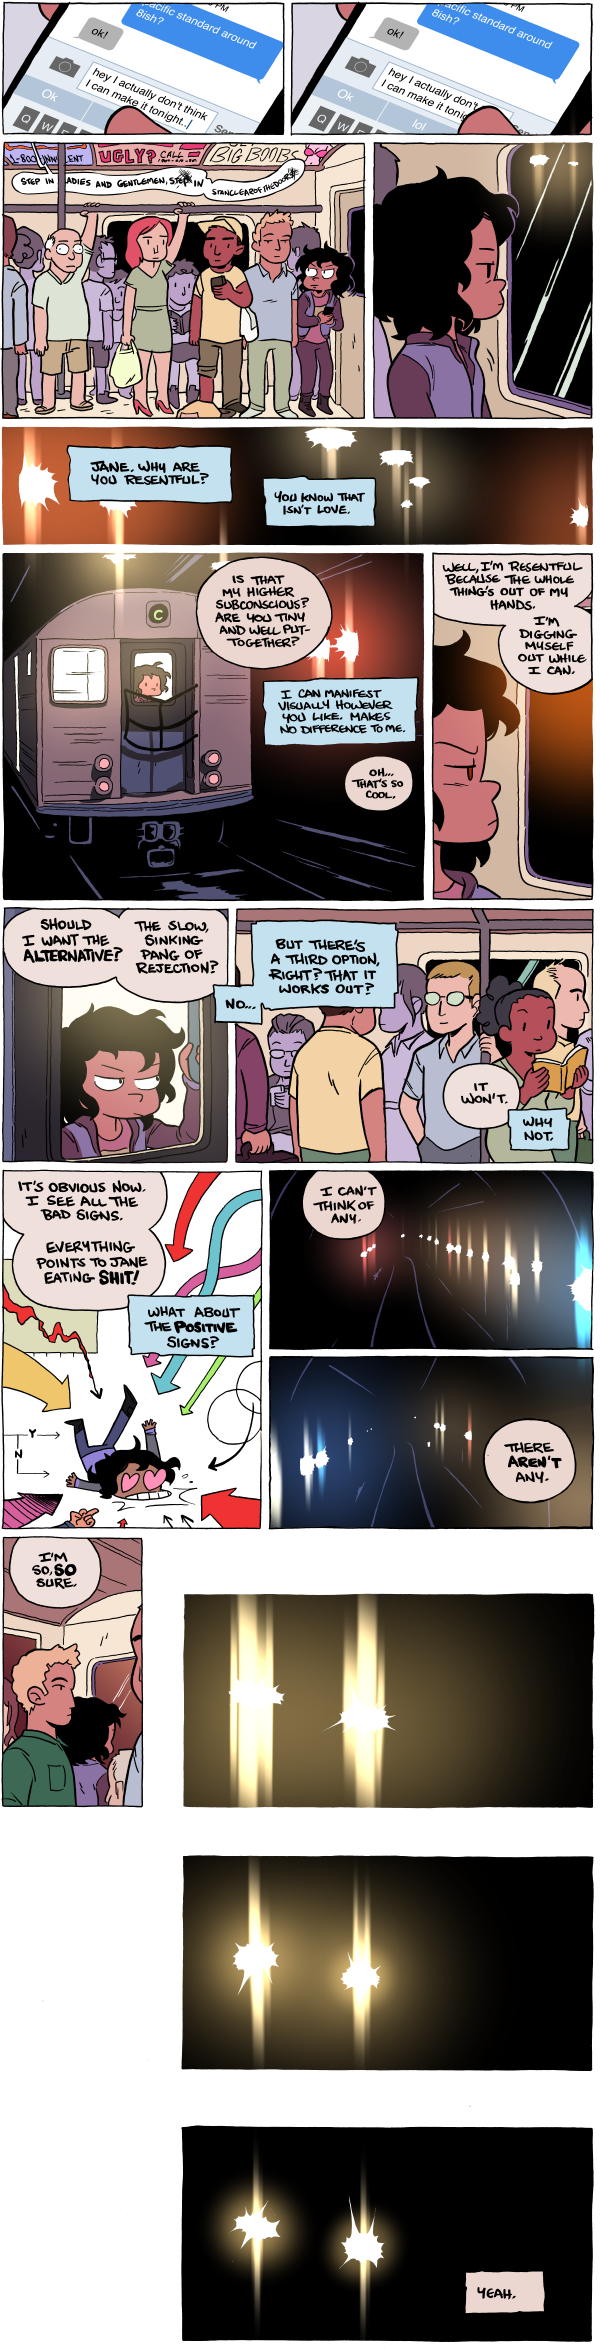 #815 + 816 – there’s a third option, right?